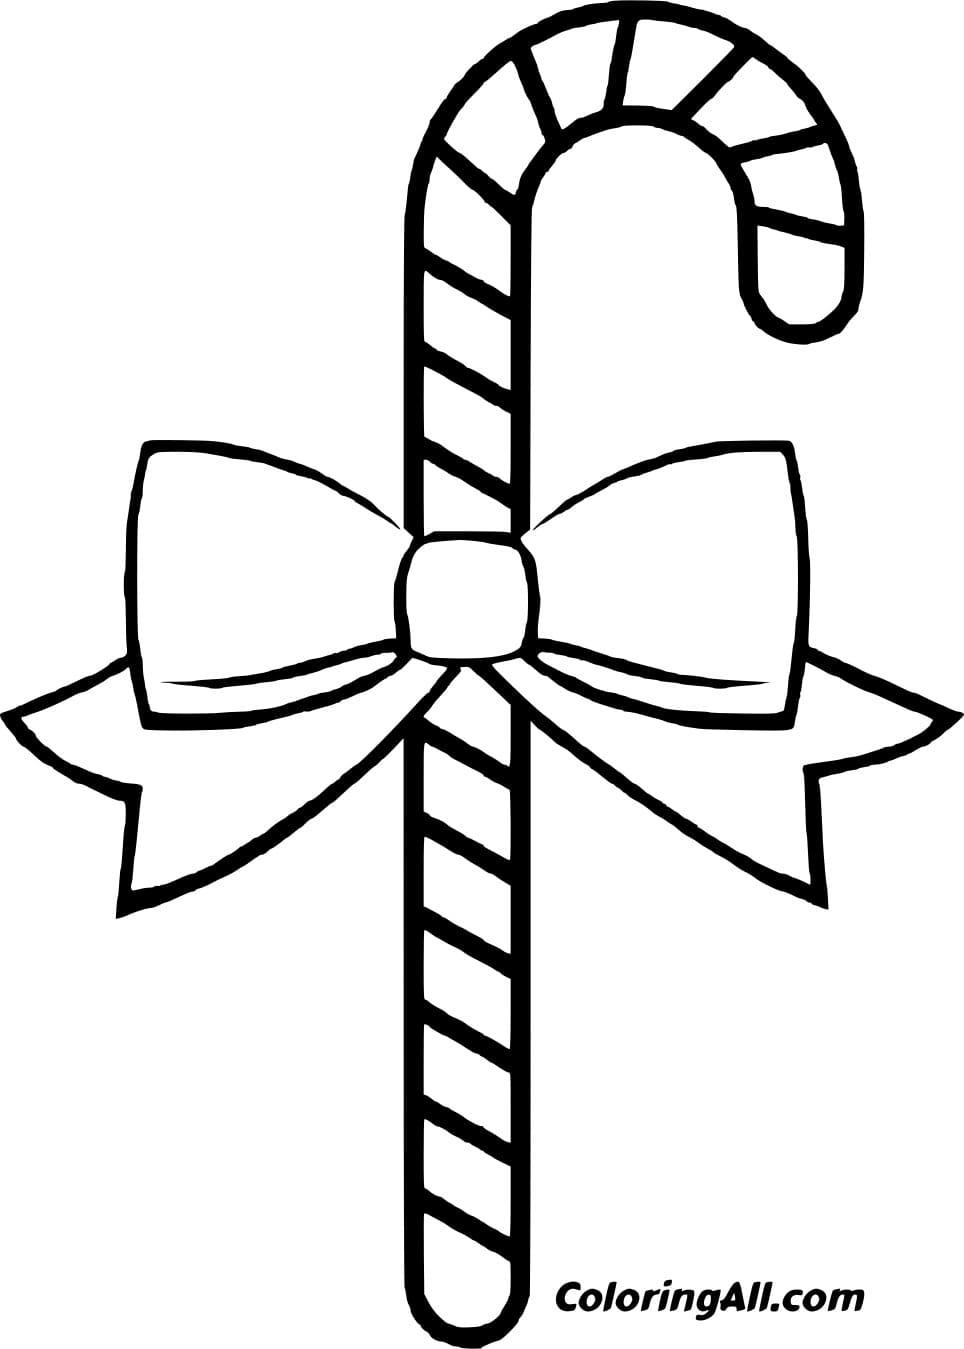 Simple Thin Candy Cane With A Bowknot